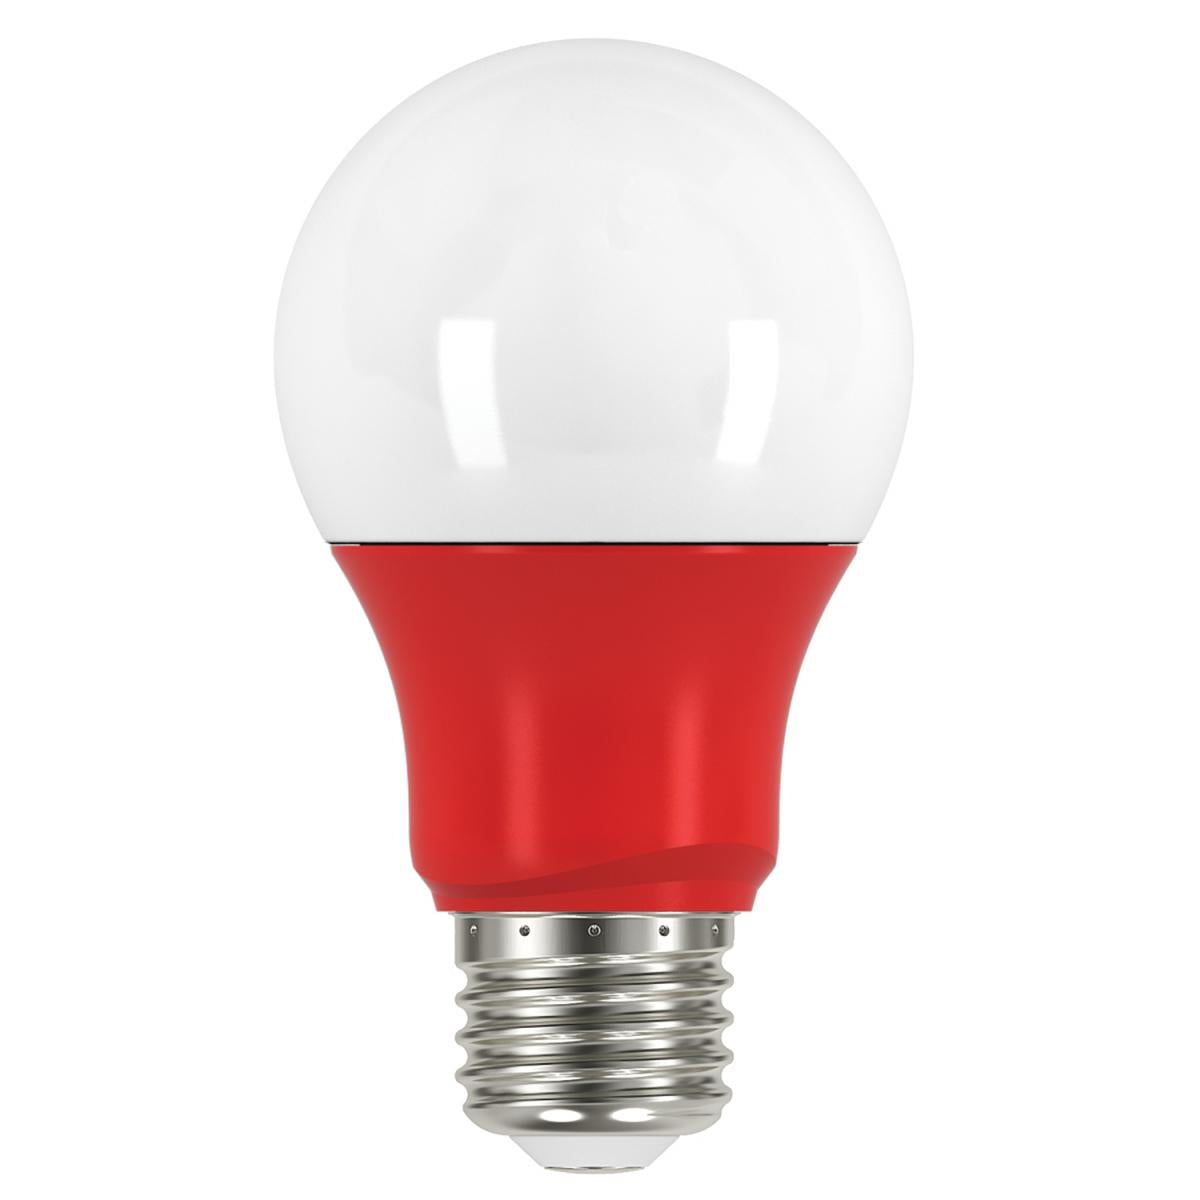 Replacement for Satco S9642 2A19/LED/RED/120V 2 Watt A19 LED Red when lit Medium base 120 Volt